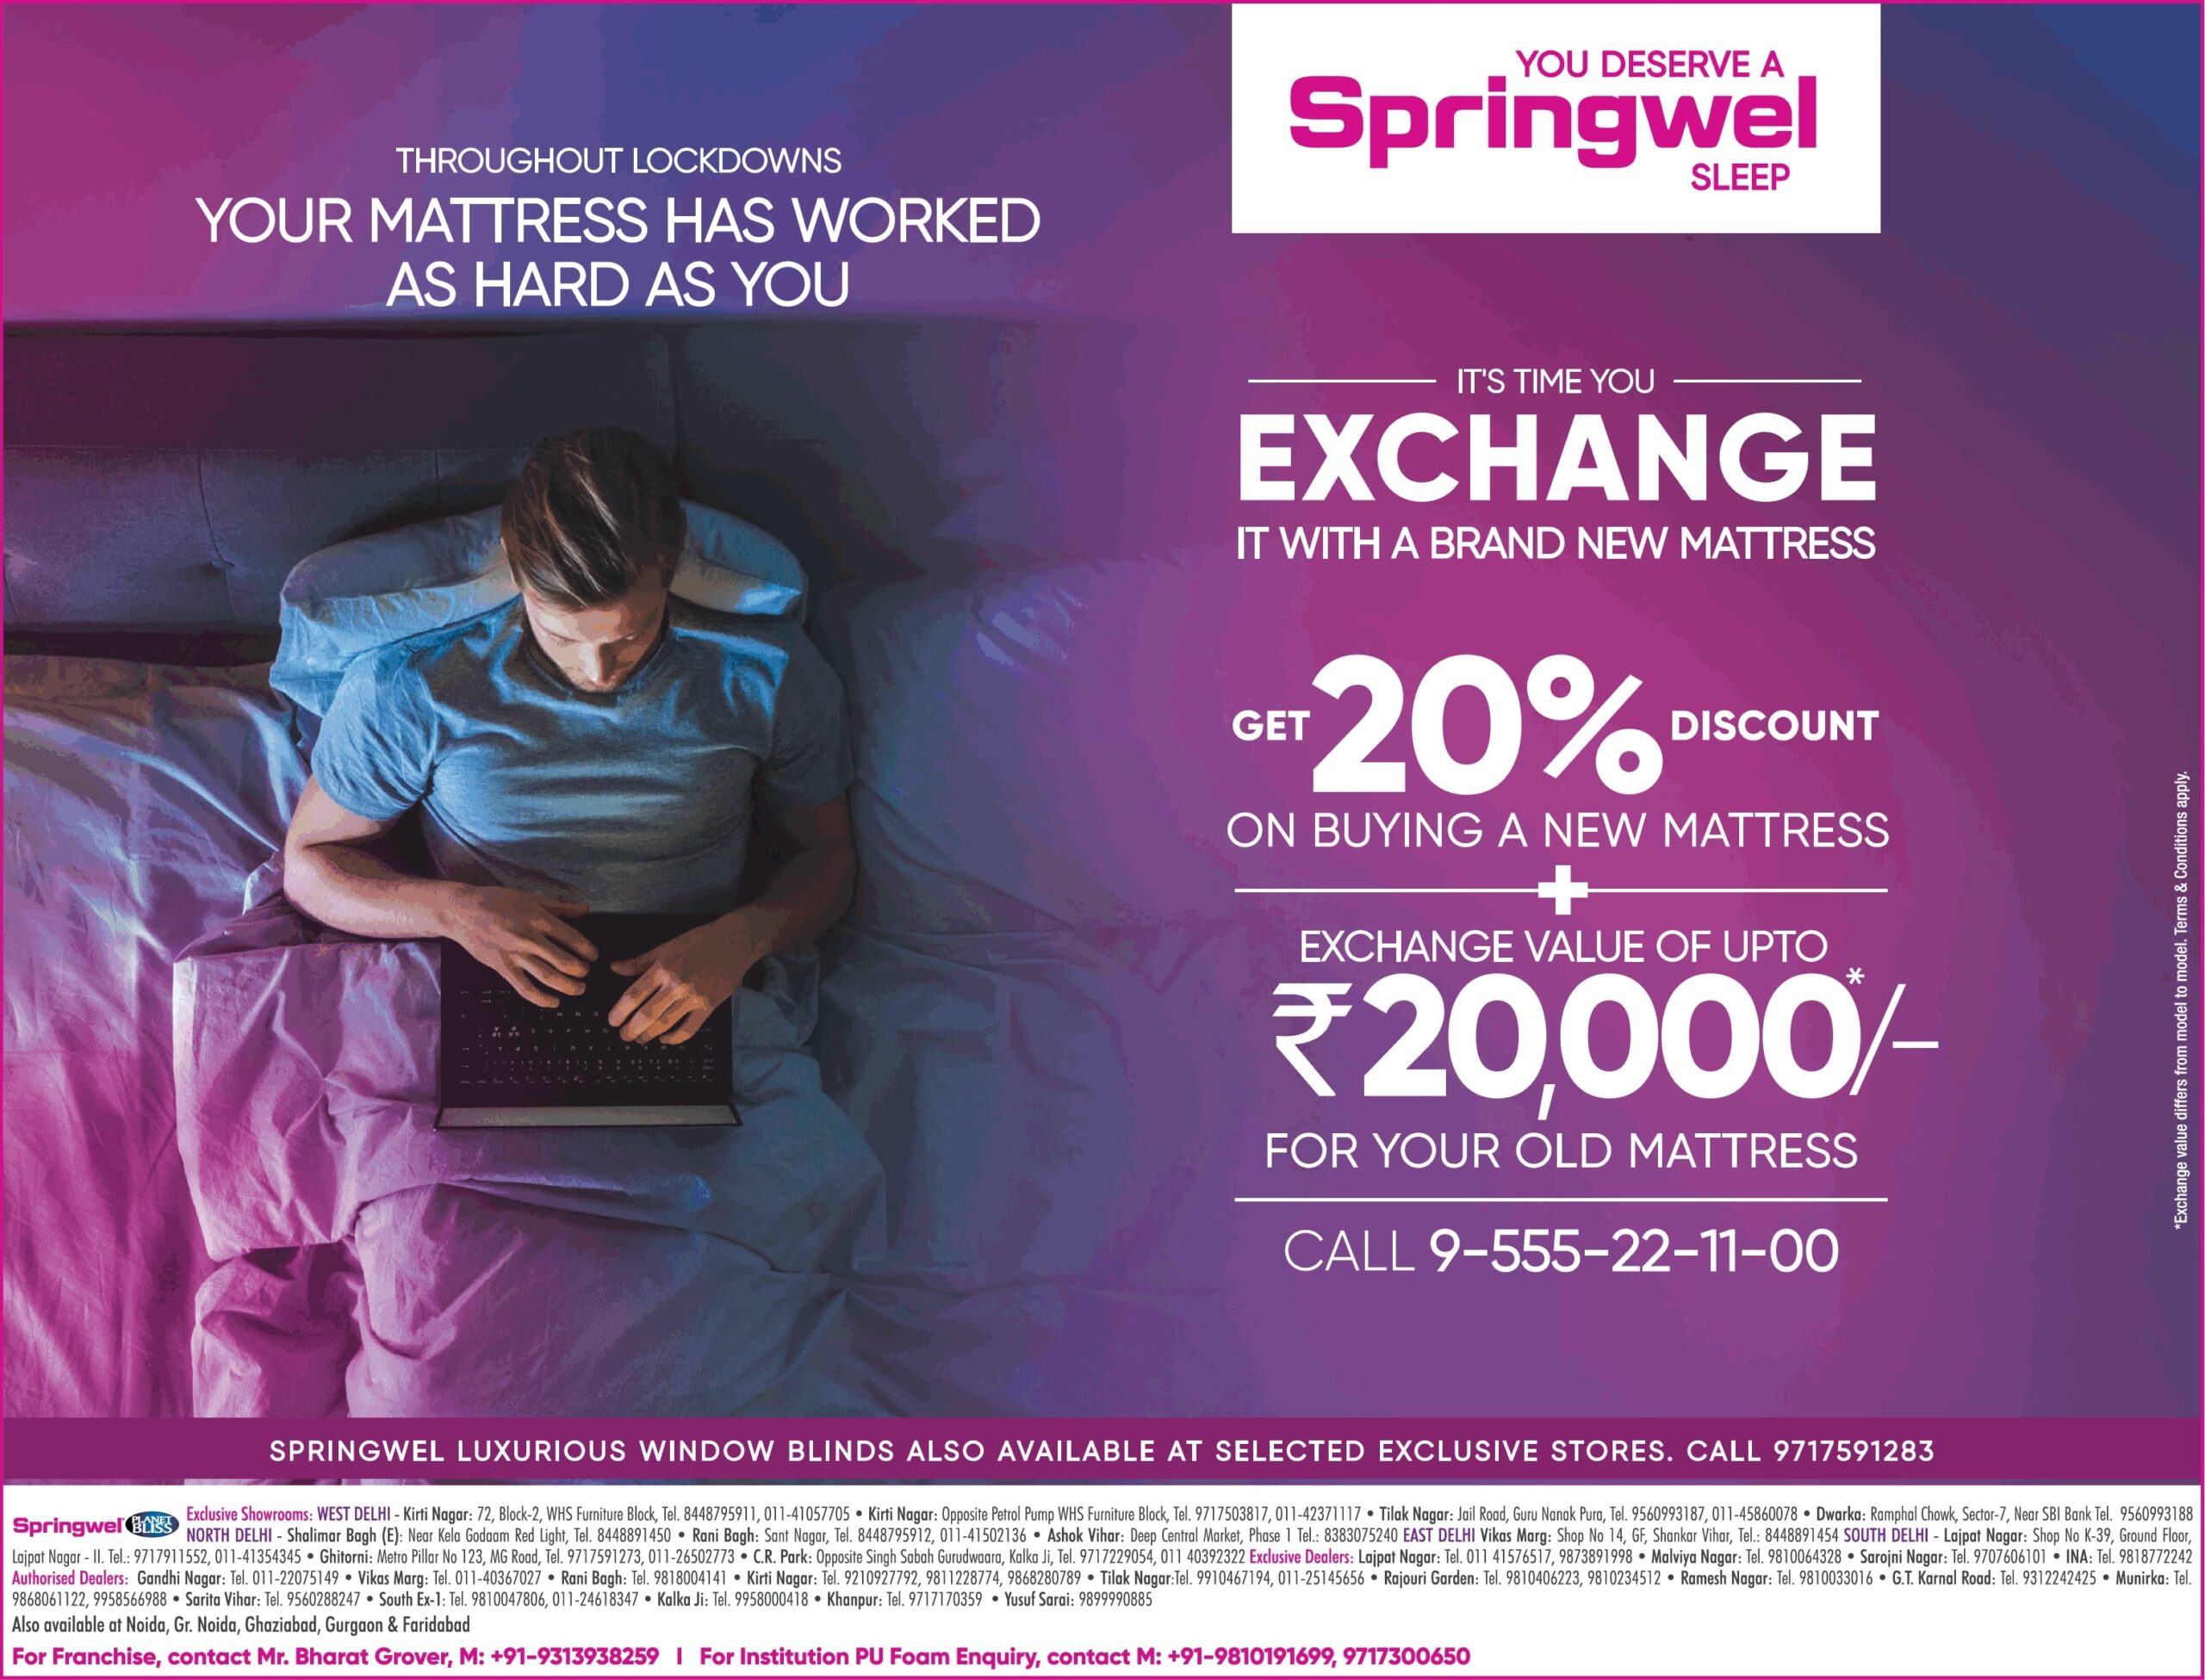 springwel-sleep-its-time-you-exchange-it-with-a-brand-new-mattress-ad-delhi-times-03-07-2021